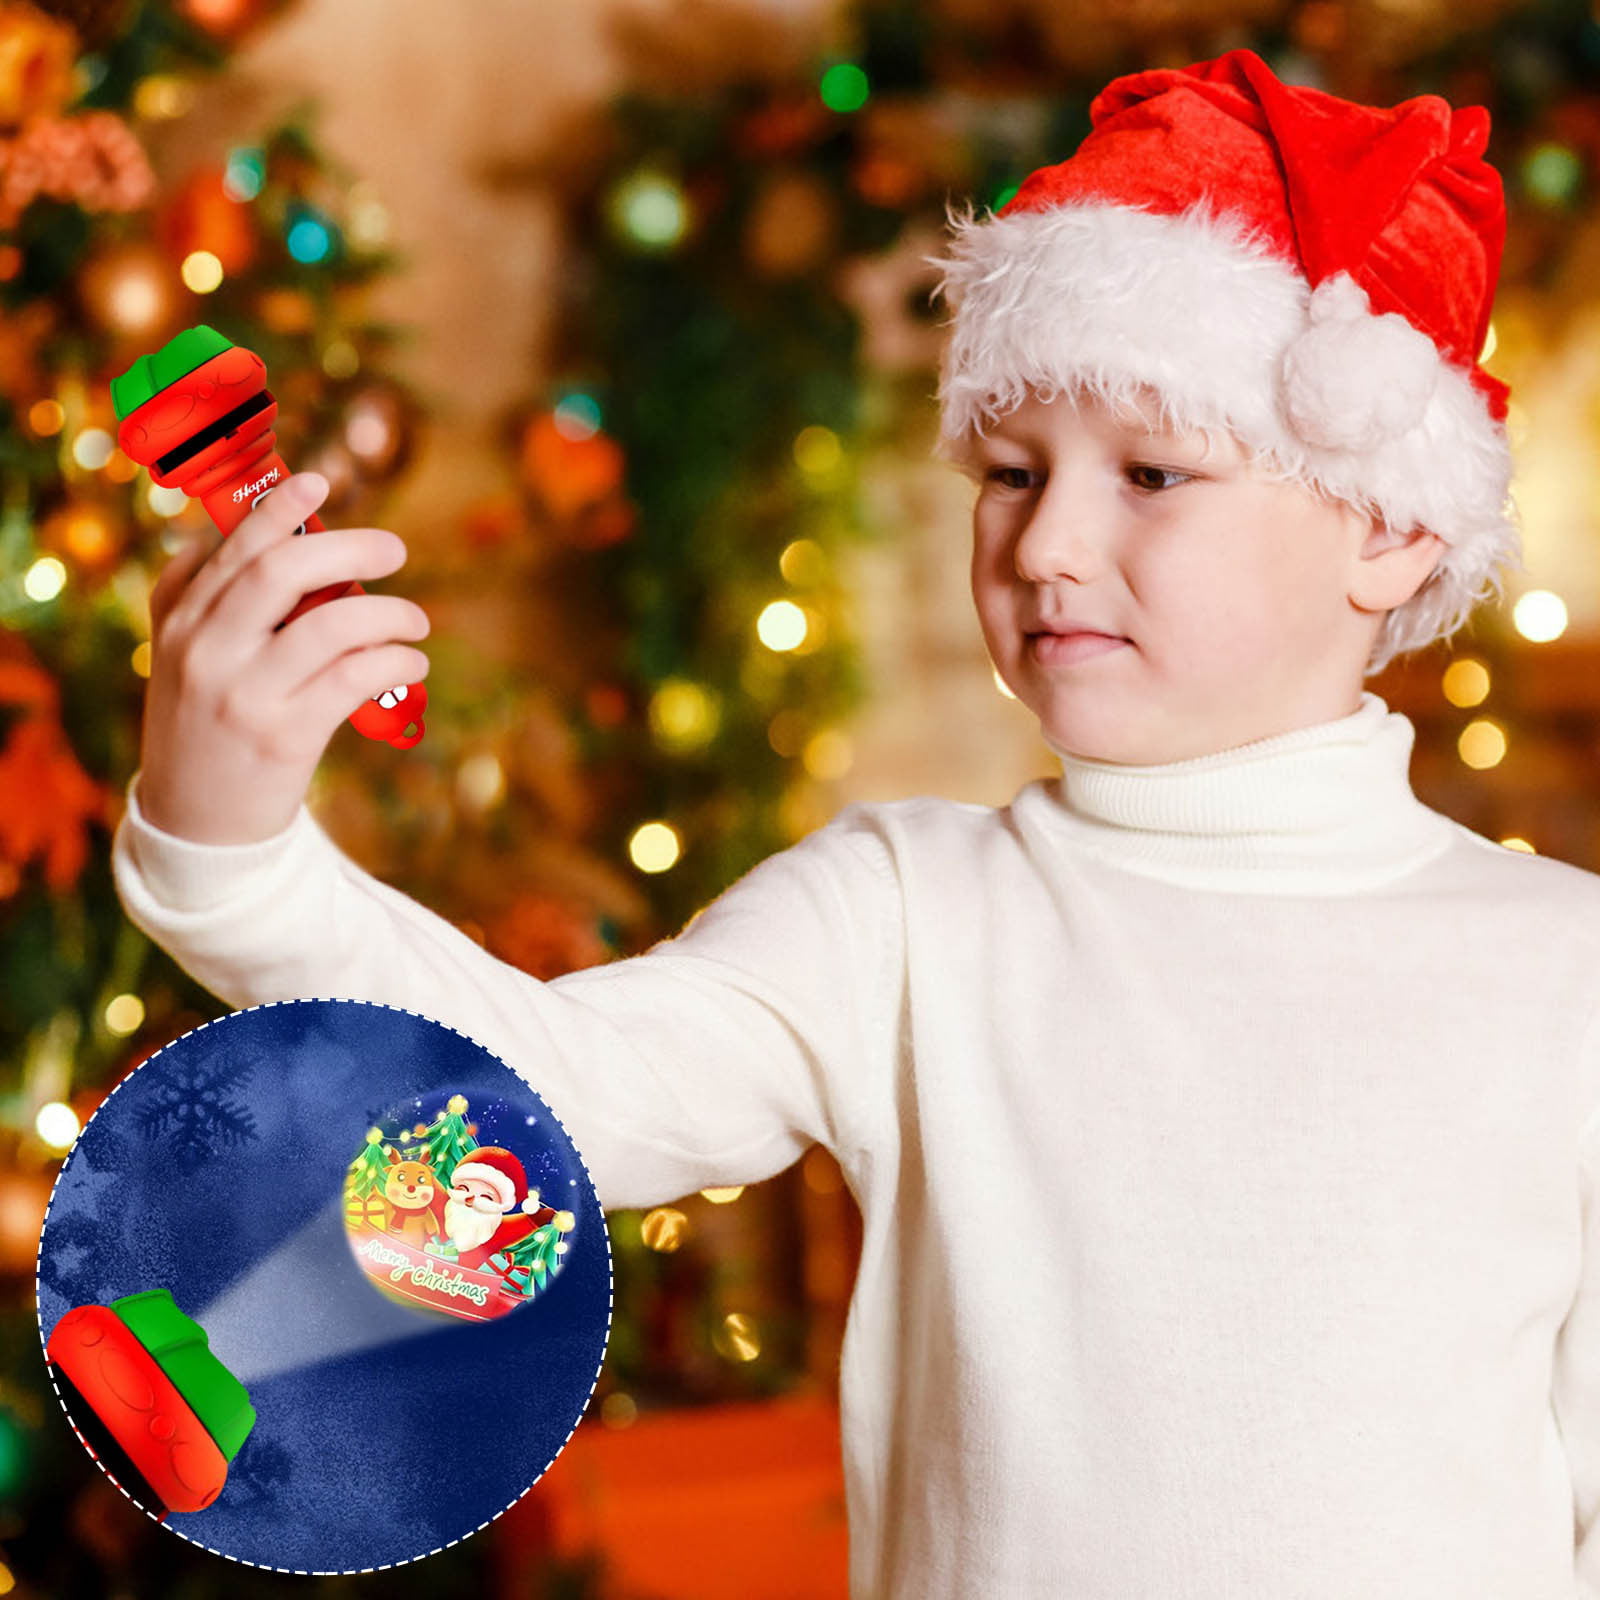 Christmas Kids Projector Flashlight Projector, Christmas Toddler Gifts  Under 5 Dollars,Slide Projector Torch Education Learning Santa Claus  Christmas